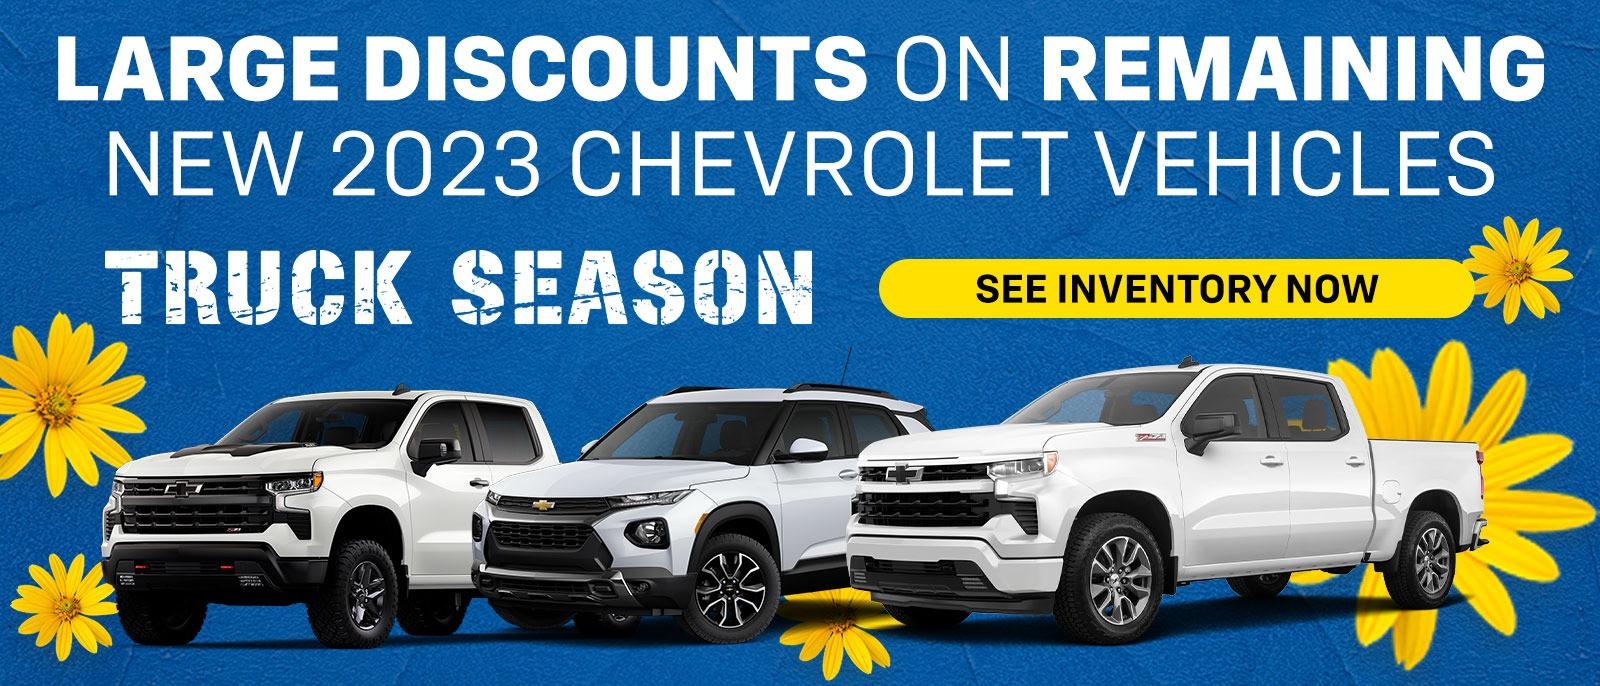 Large Discounts on remaining new 2023 Chevrolet vehicles